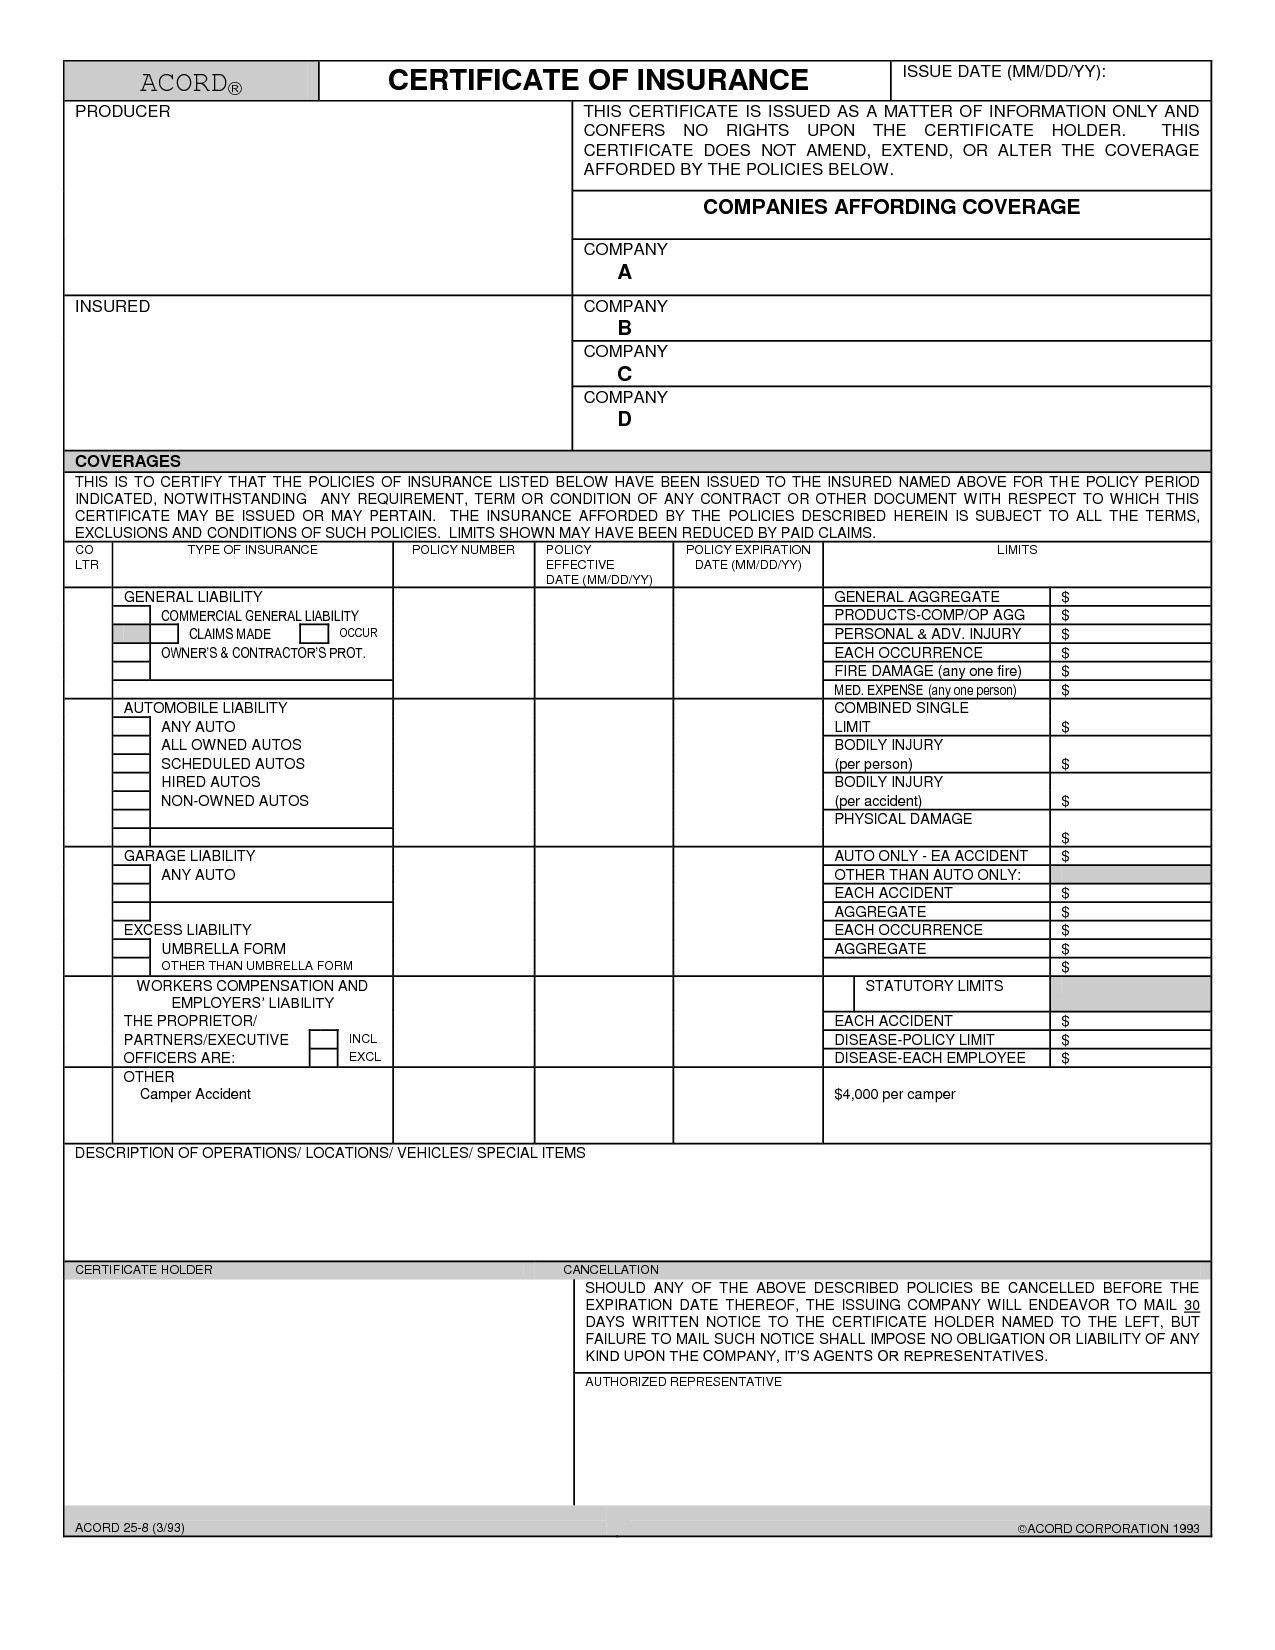 Blank Acord Certificate Of Insurance Printable Birthday Certificates Document